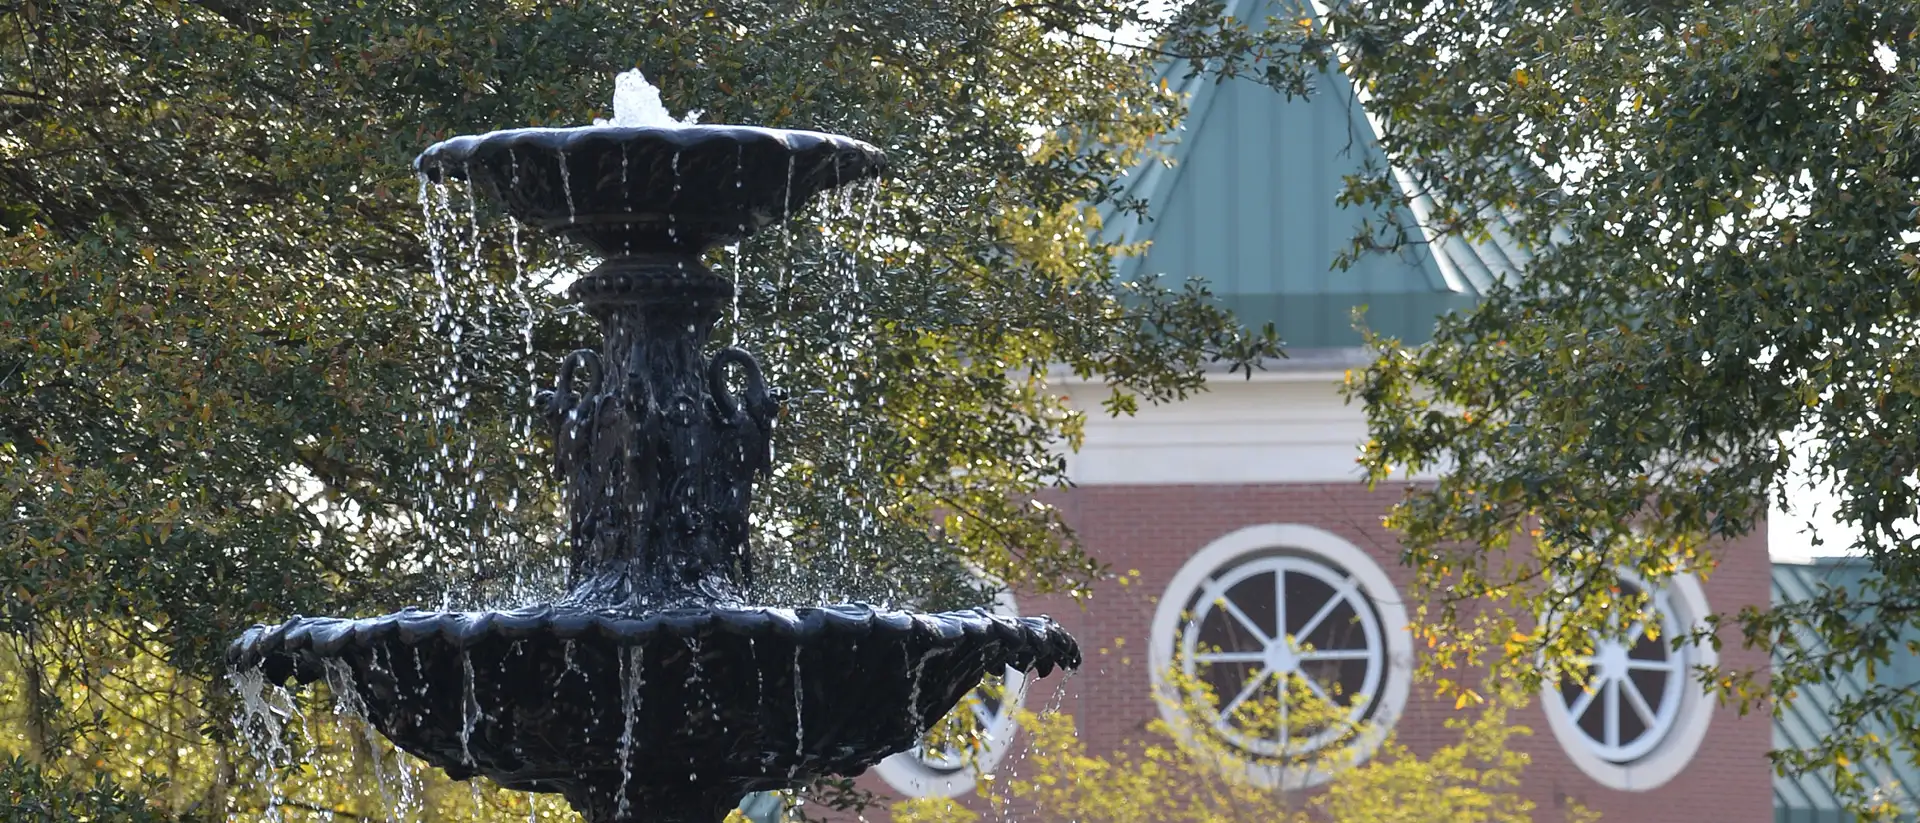 the fountain splashing with student center in the background, trees on the side